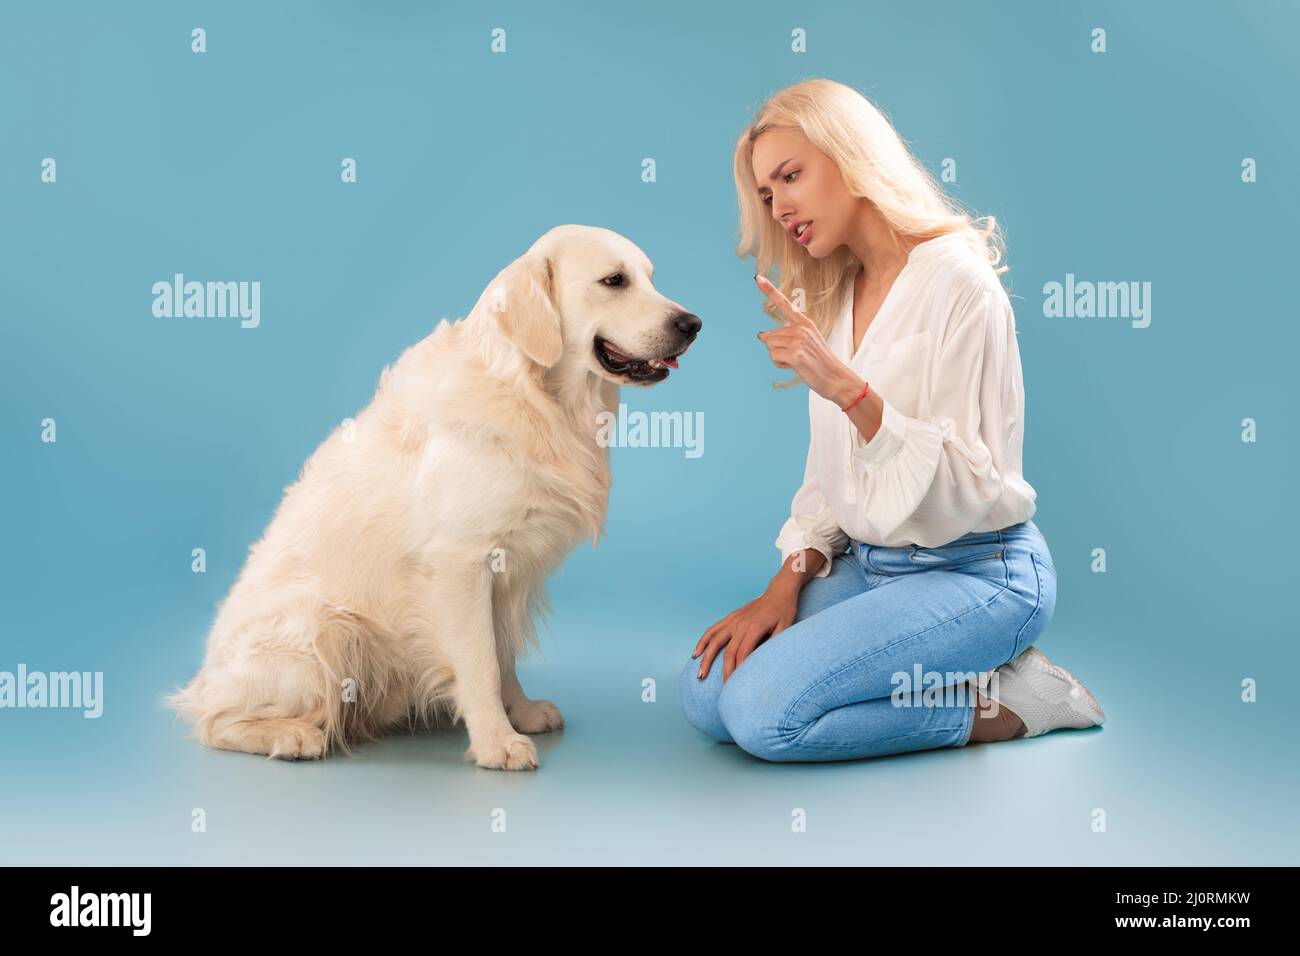 Angry woman scolding her dog at blue studio Stock Photo